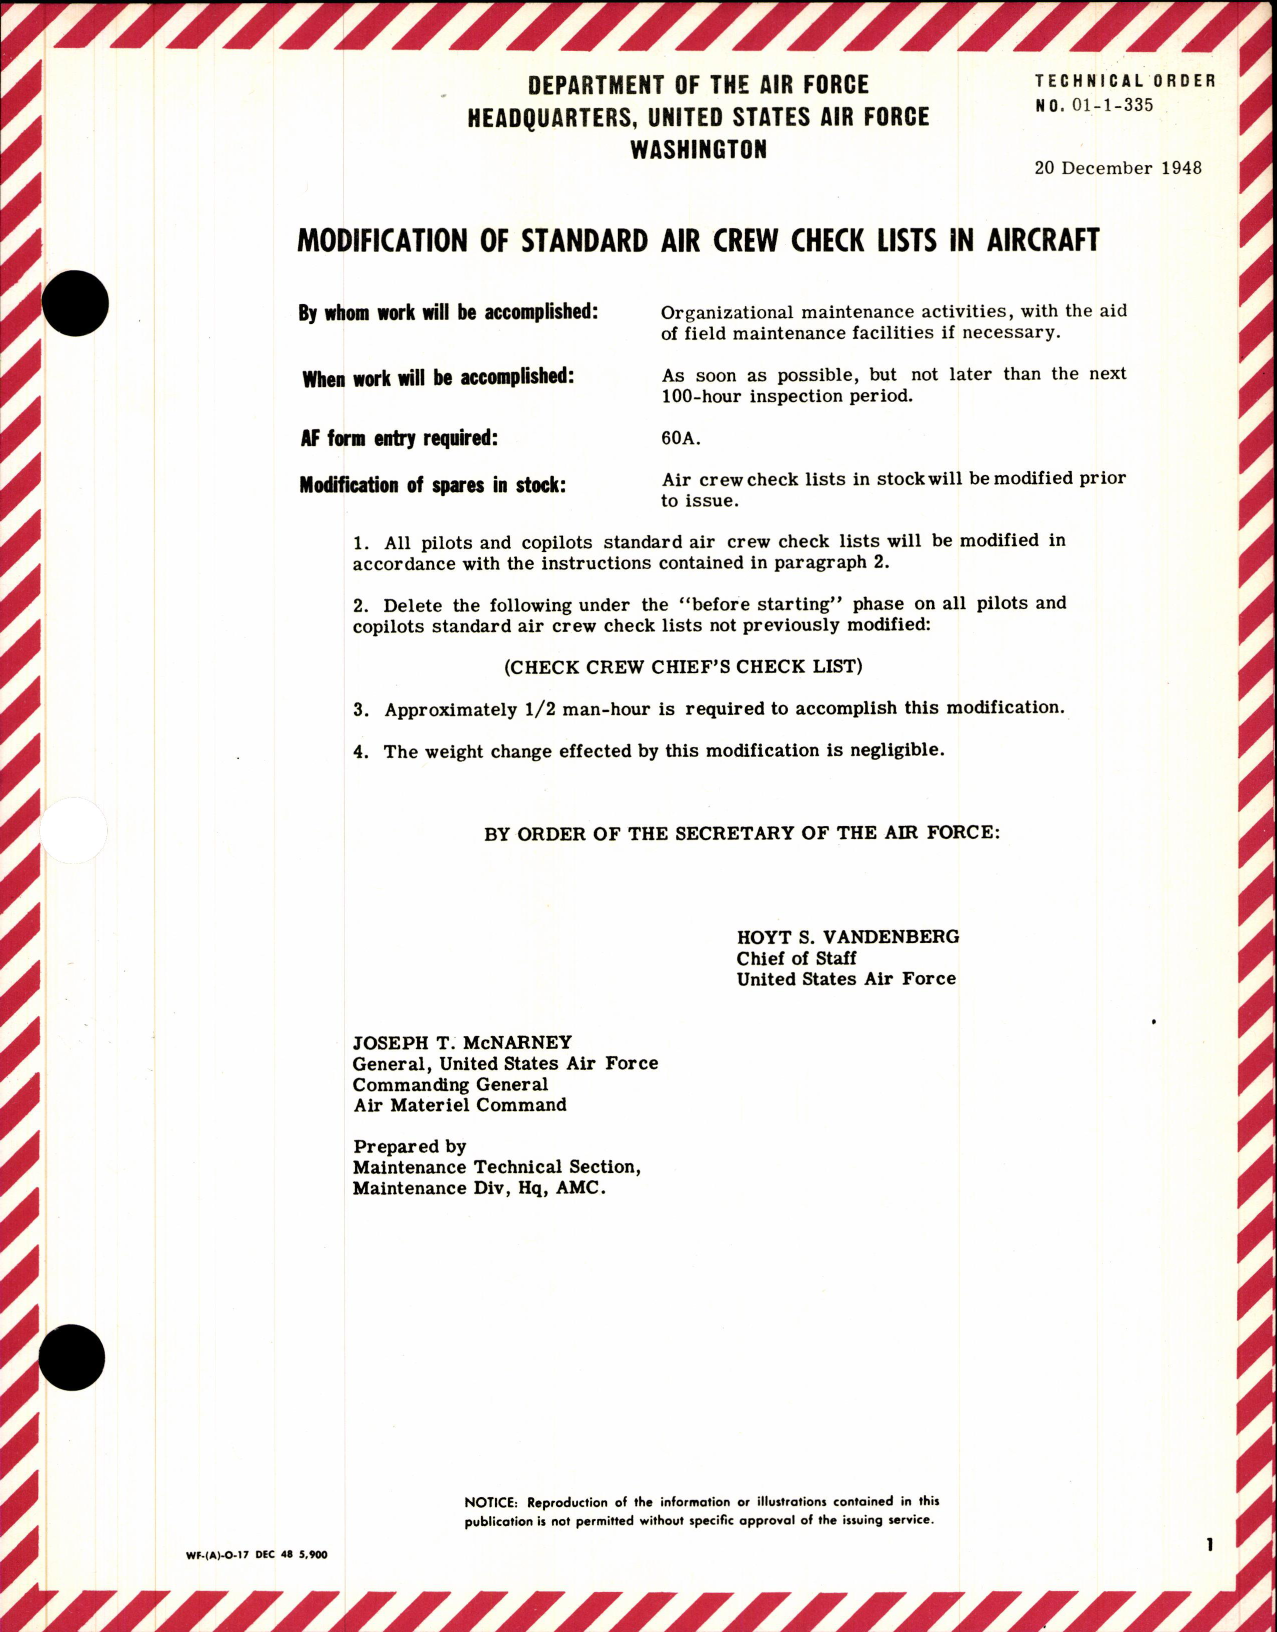 Sample page 1 from AirCorps Library document: Modification of Standard Air Crew Check Lists in Aircraft